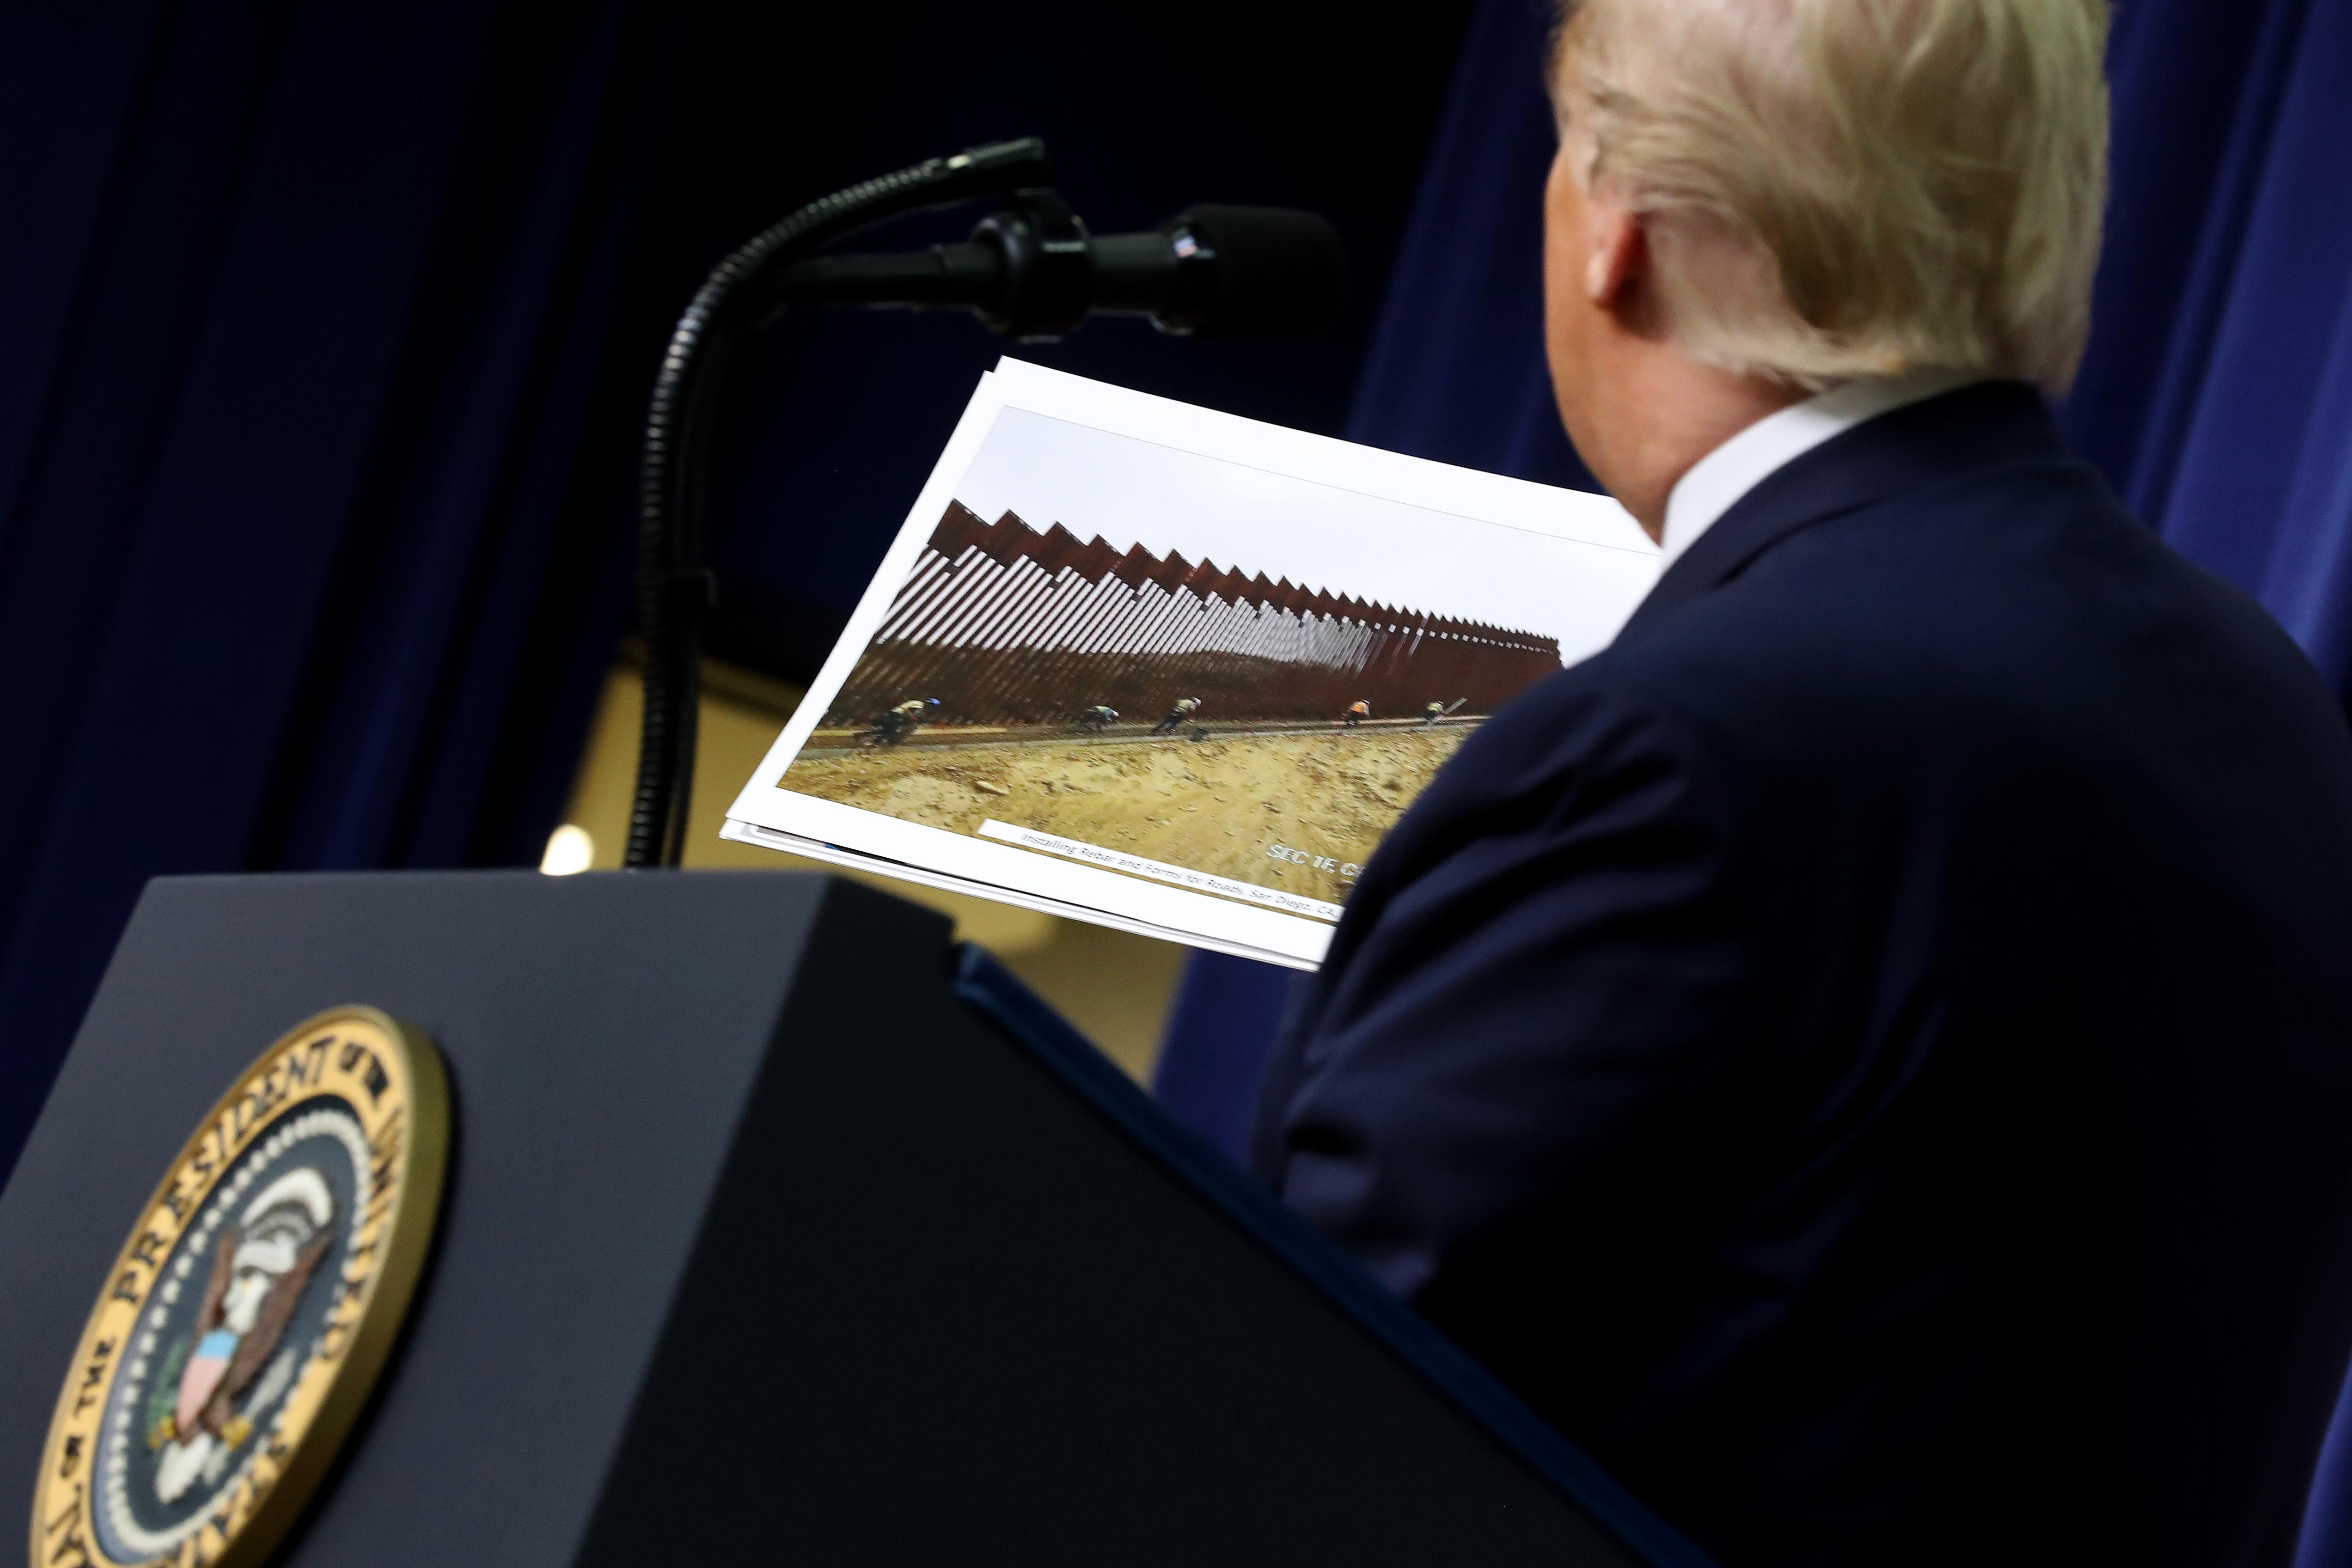 Trump stands at a podium holding a photograph of a section of the border wall.